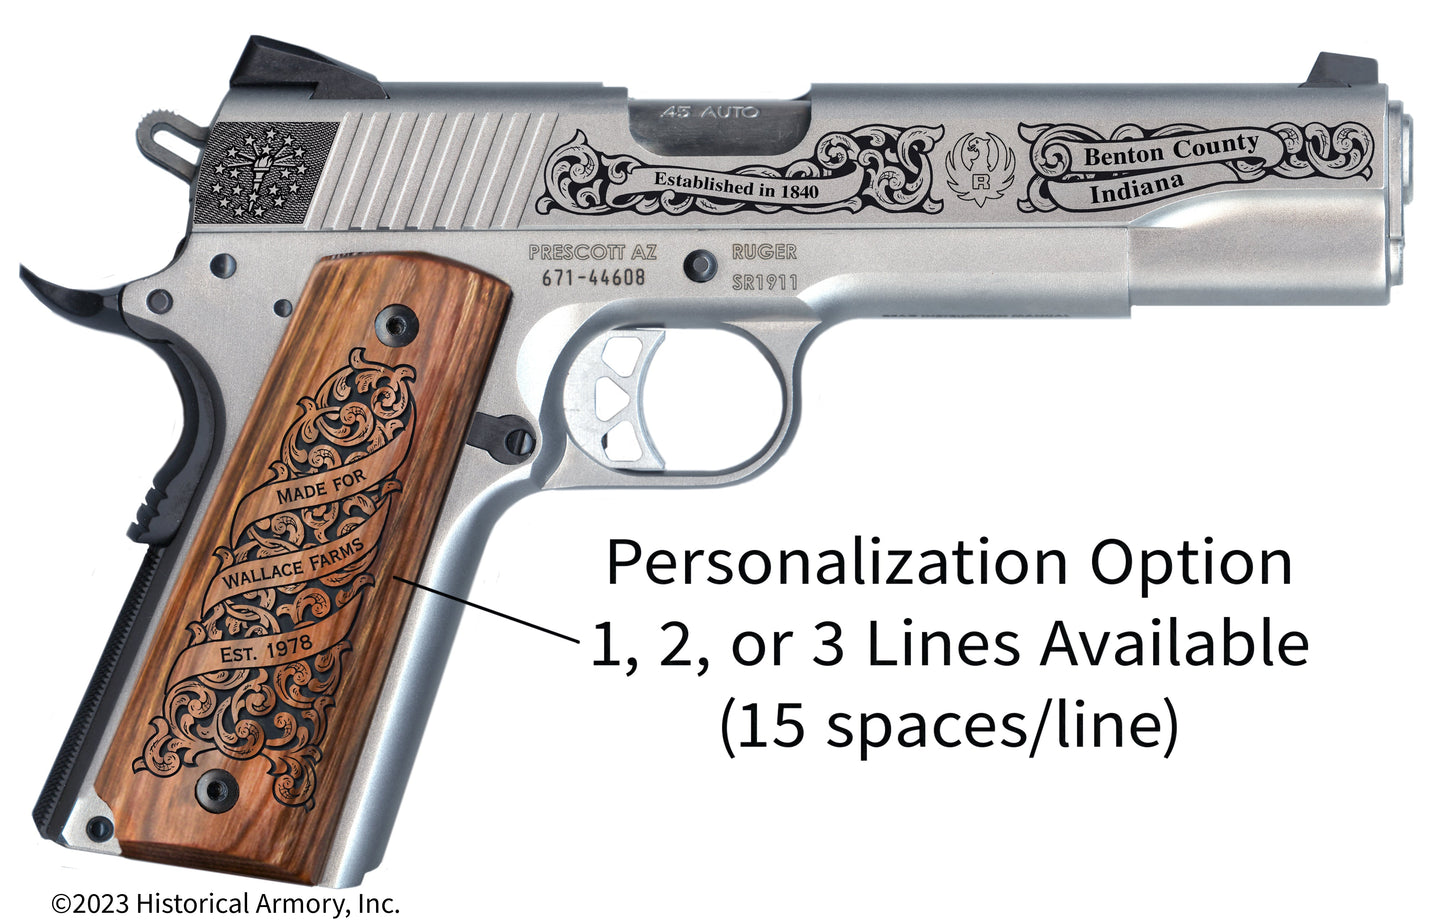 Benton County Indiana Personalized Engraved .45 Auto Ruger 1911